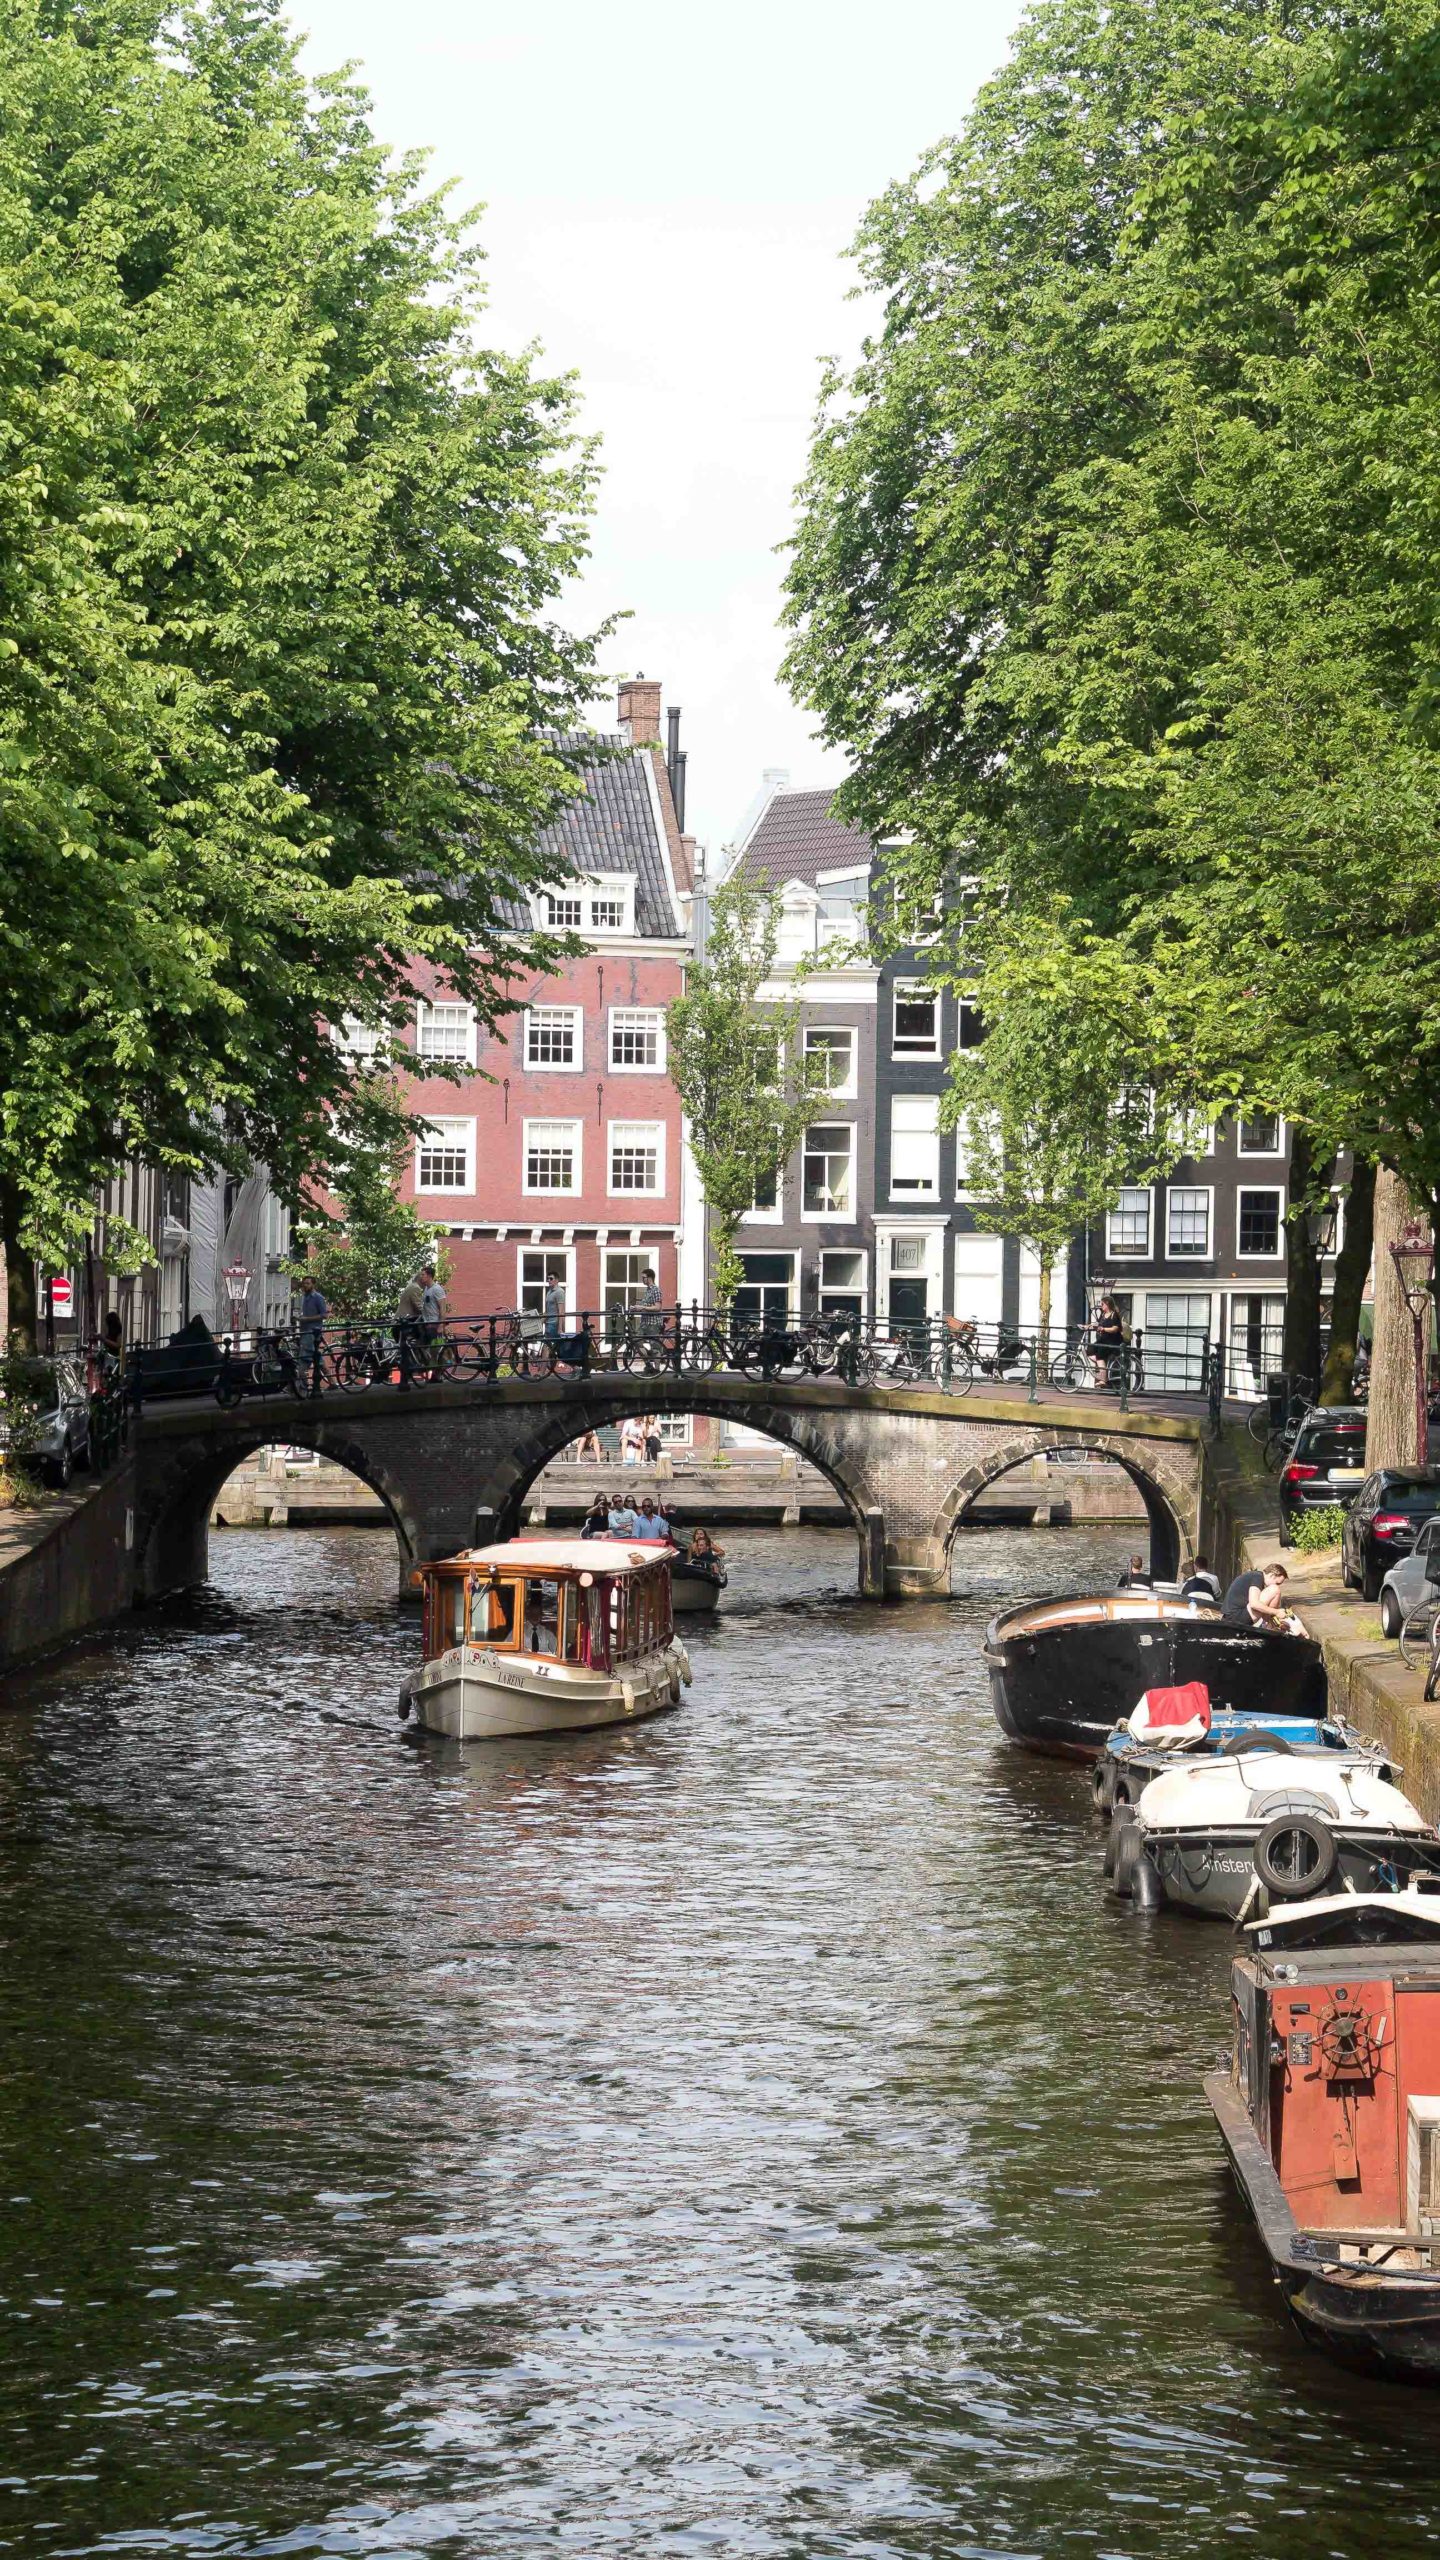 Jordan Taylor C - An Insider’s Guide to Amsterdam, amsterdam, amsterdam travel, amsterdam guide, travel guide, AMS travel guide, an insider’s guide to Amsterdam, an insider’s guide, insider guide, amsterdam travel guide, the wittenberg